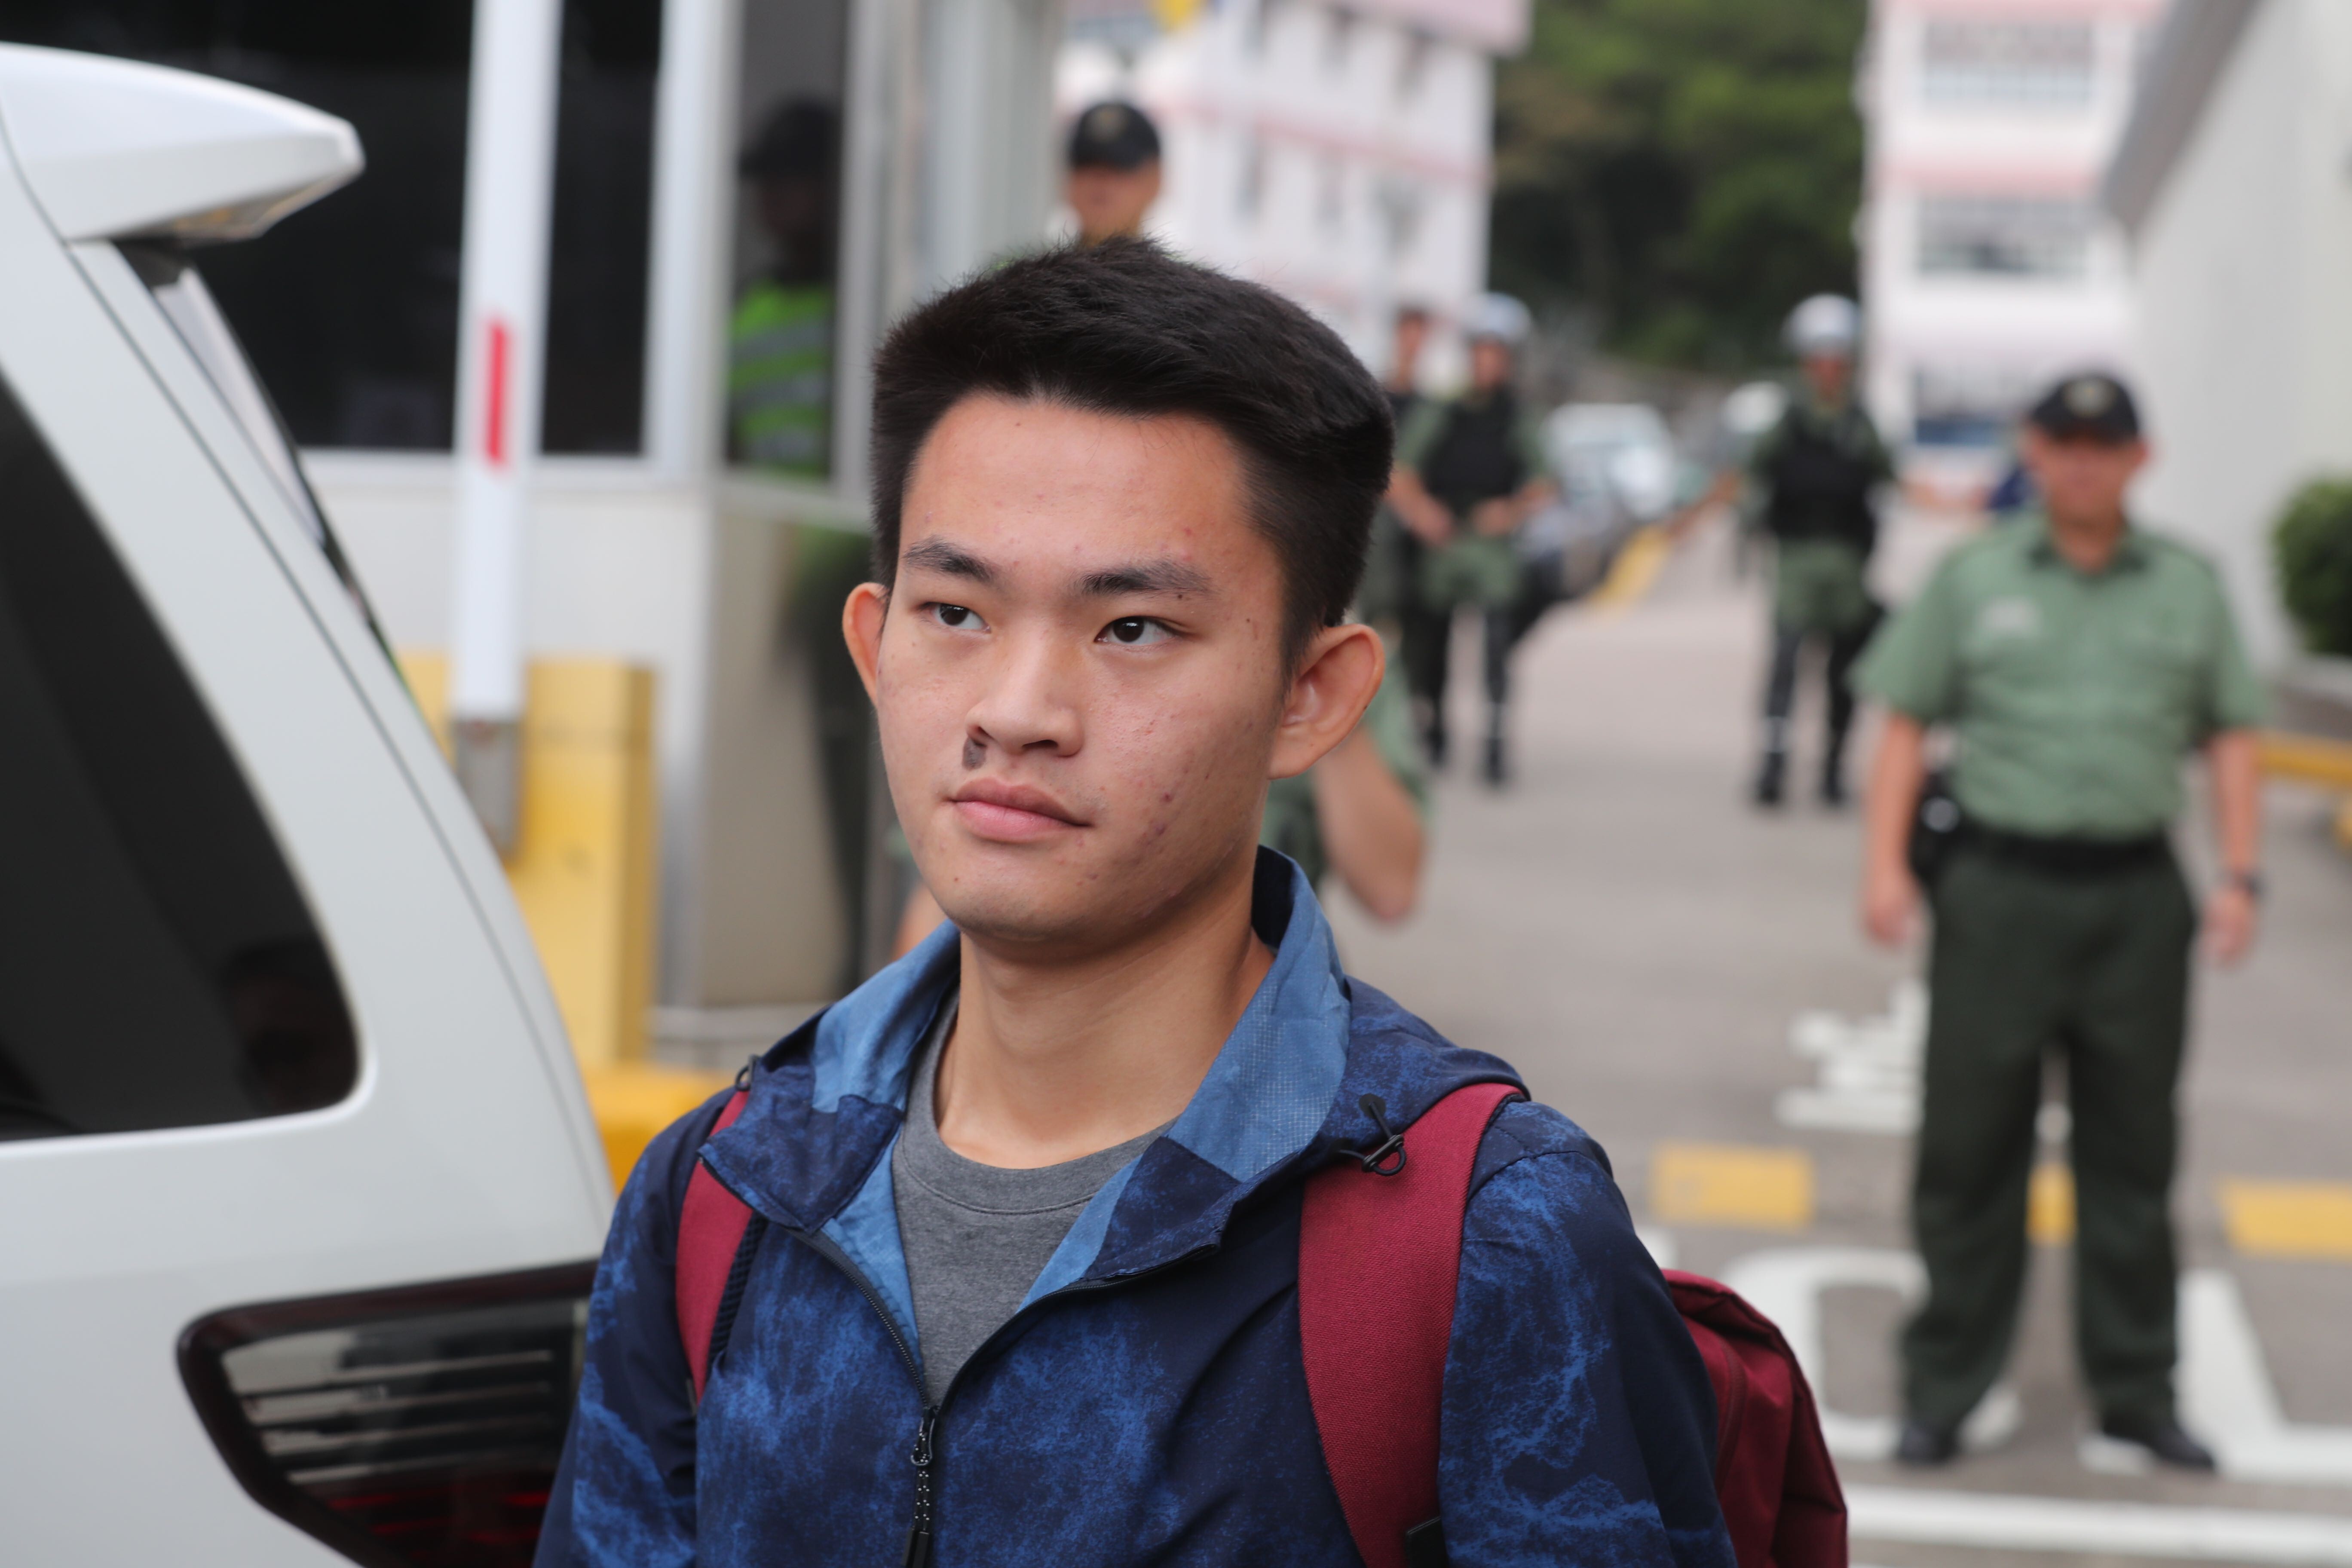 Chan Tong-kai is determined to return to Taiwan to turn himself in, according to Reverend Canon Peter Koon. Photo: Sam Tsang